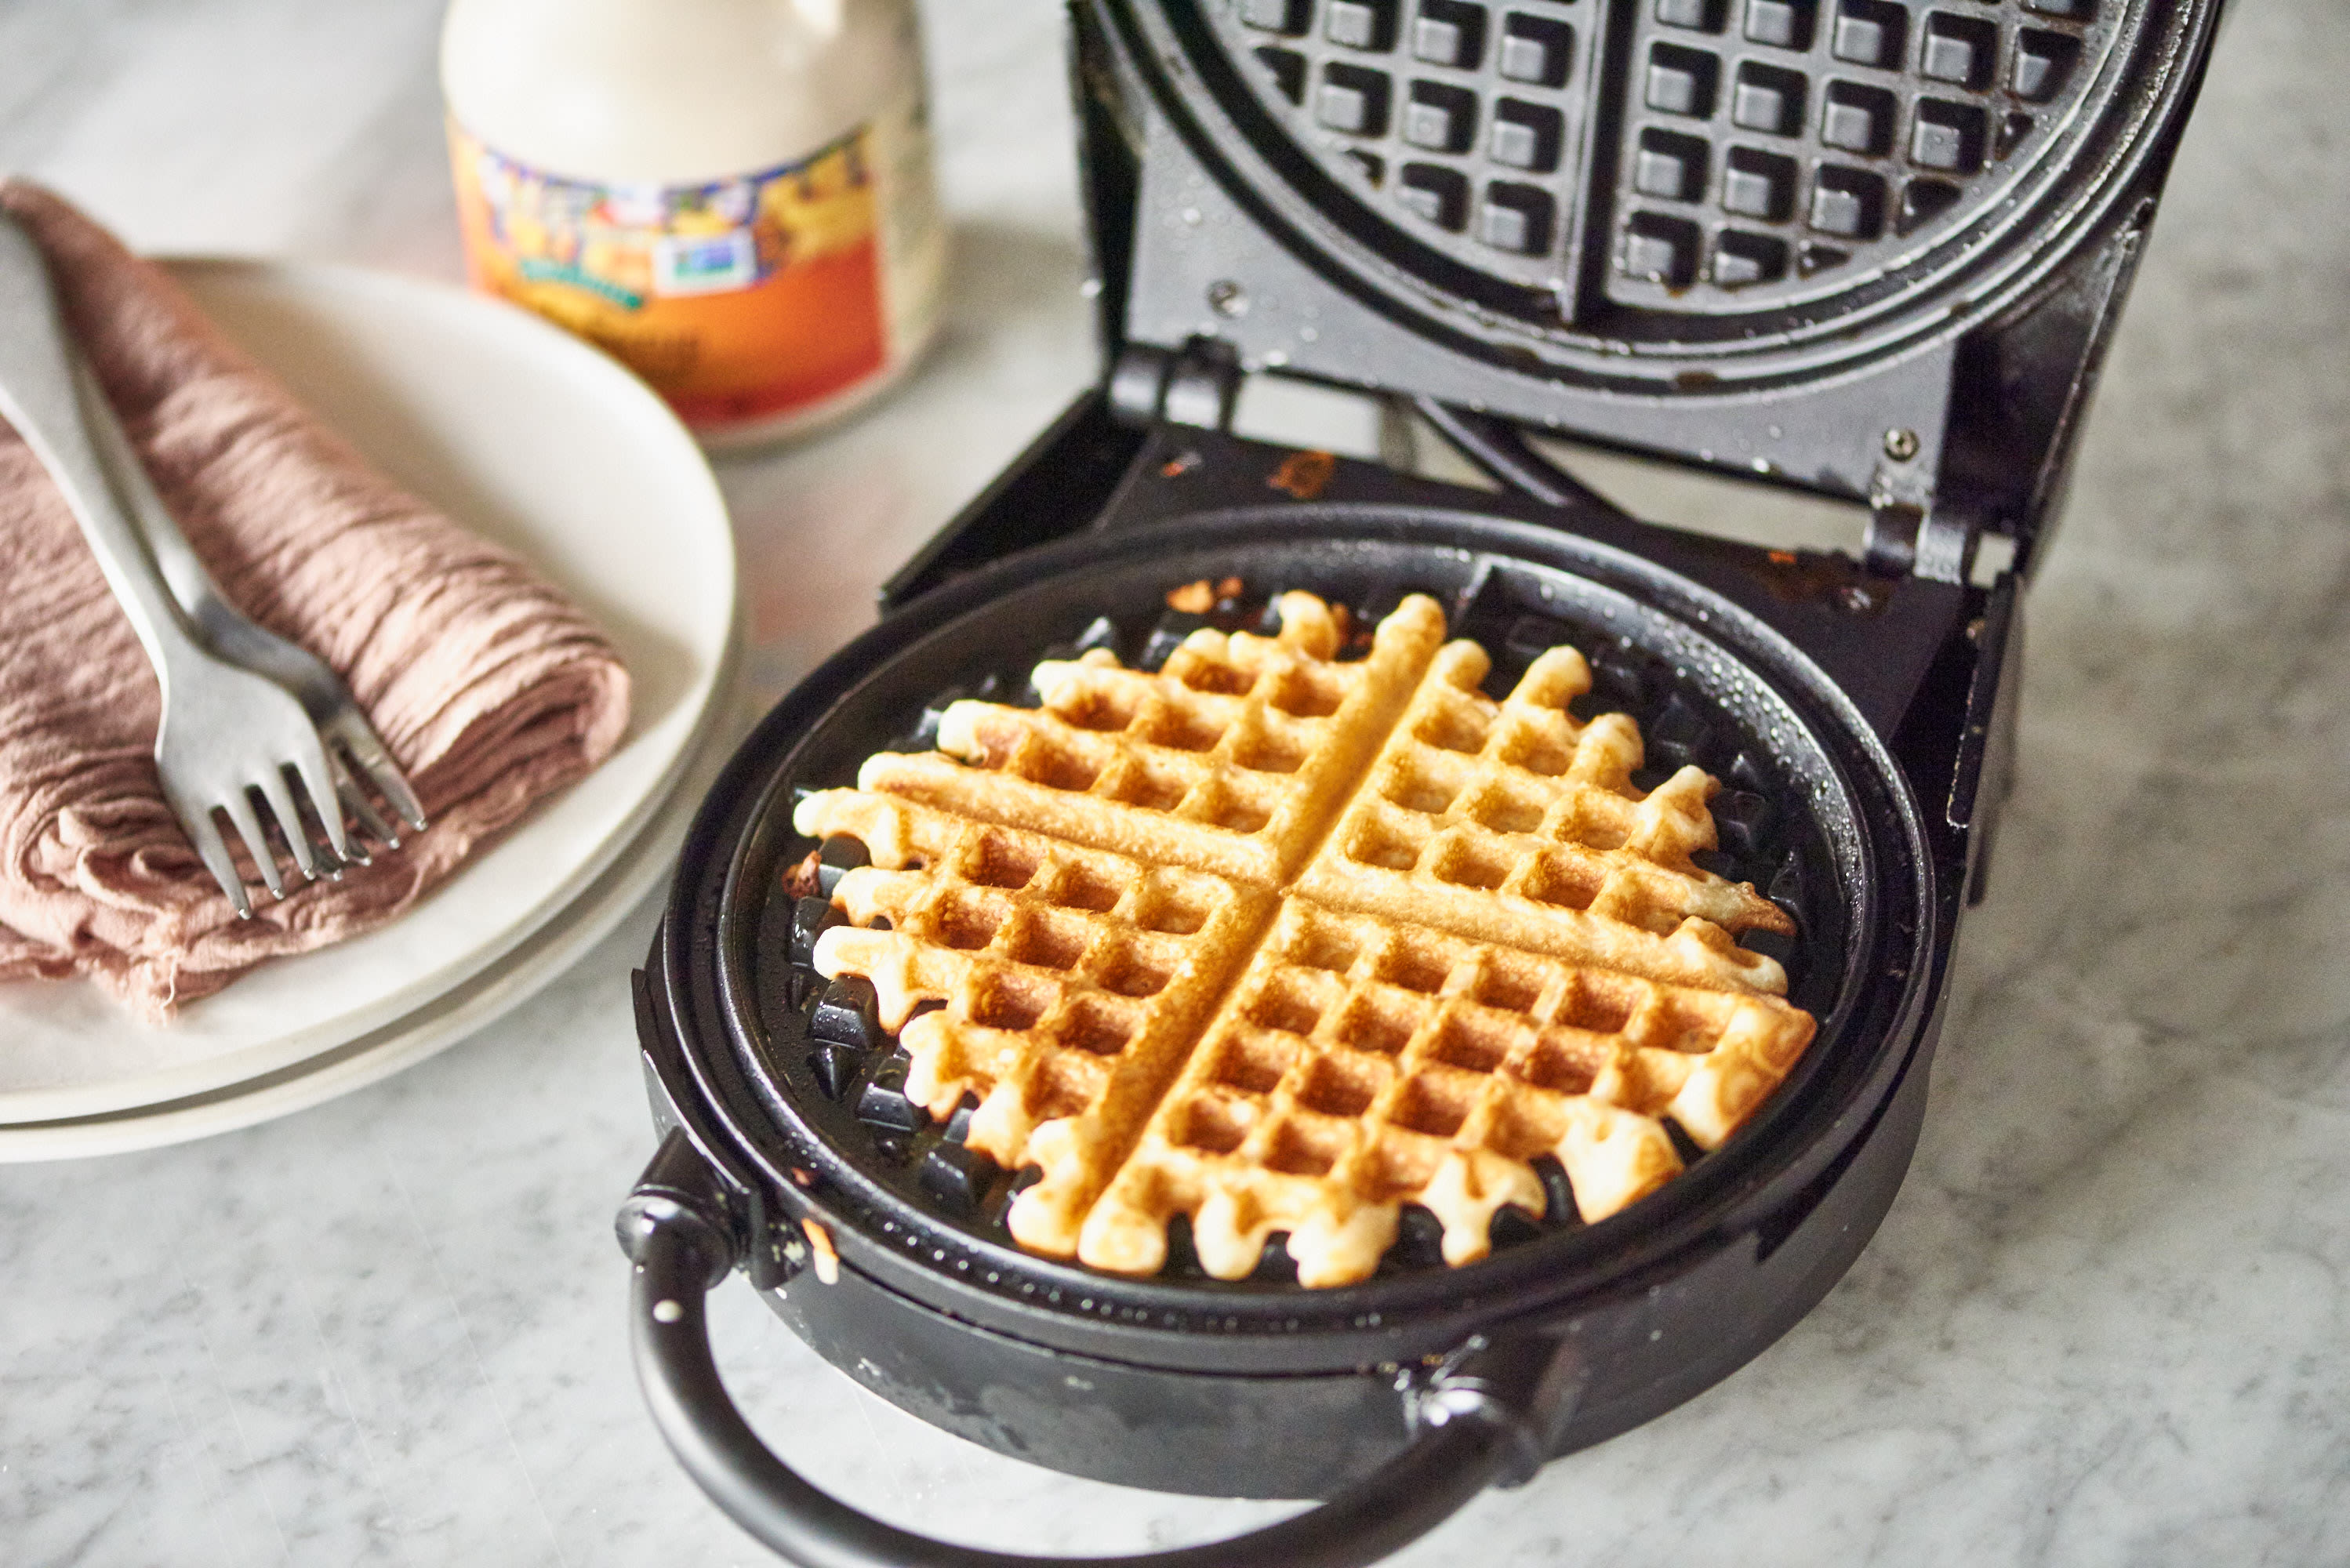 https://cdn.apartmenttherapy.info/image/upload/v1566580094/k/Photo/Lifestyle/2019-09-how-to-clean-a-waffle-iron/How-to-Clean-an-Impossibly-Gross-Waffle-Iron_066.jpg